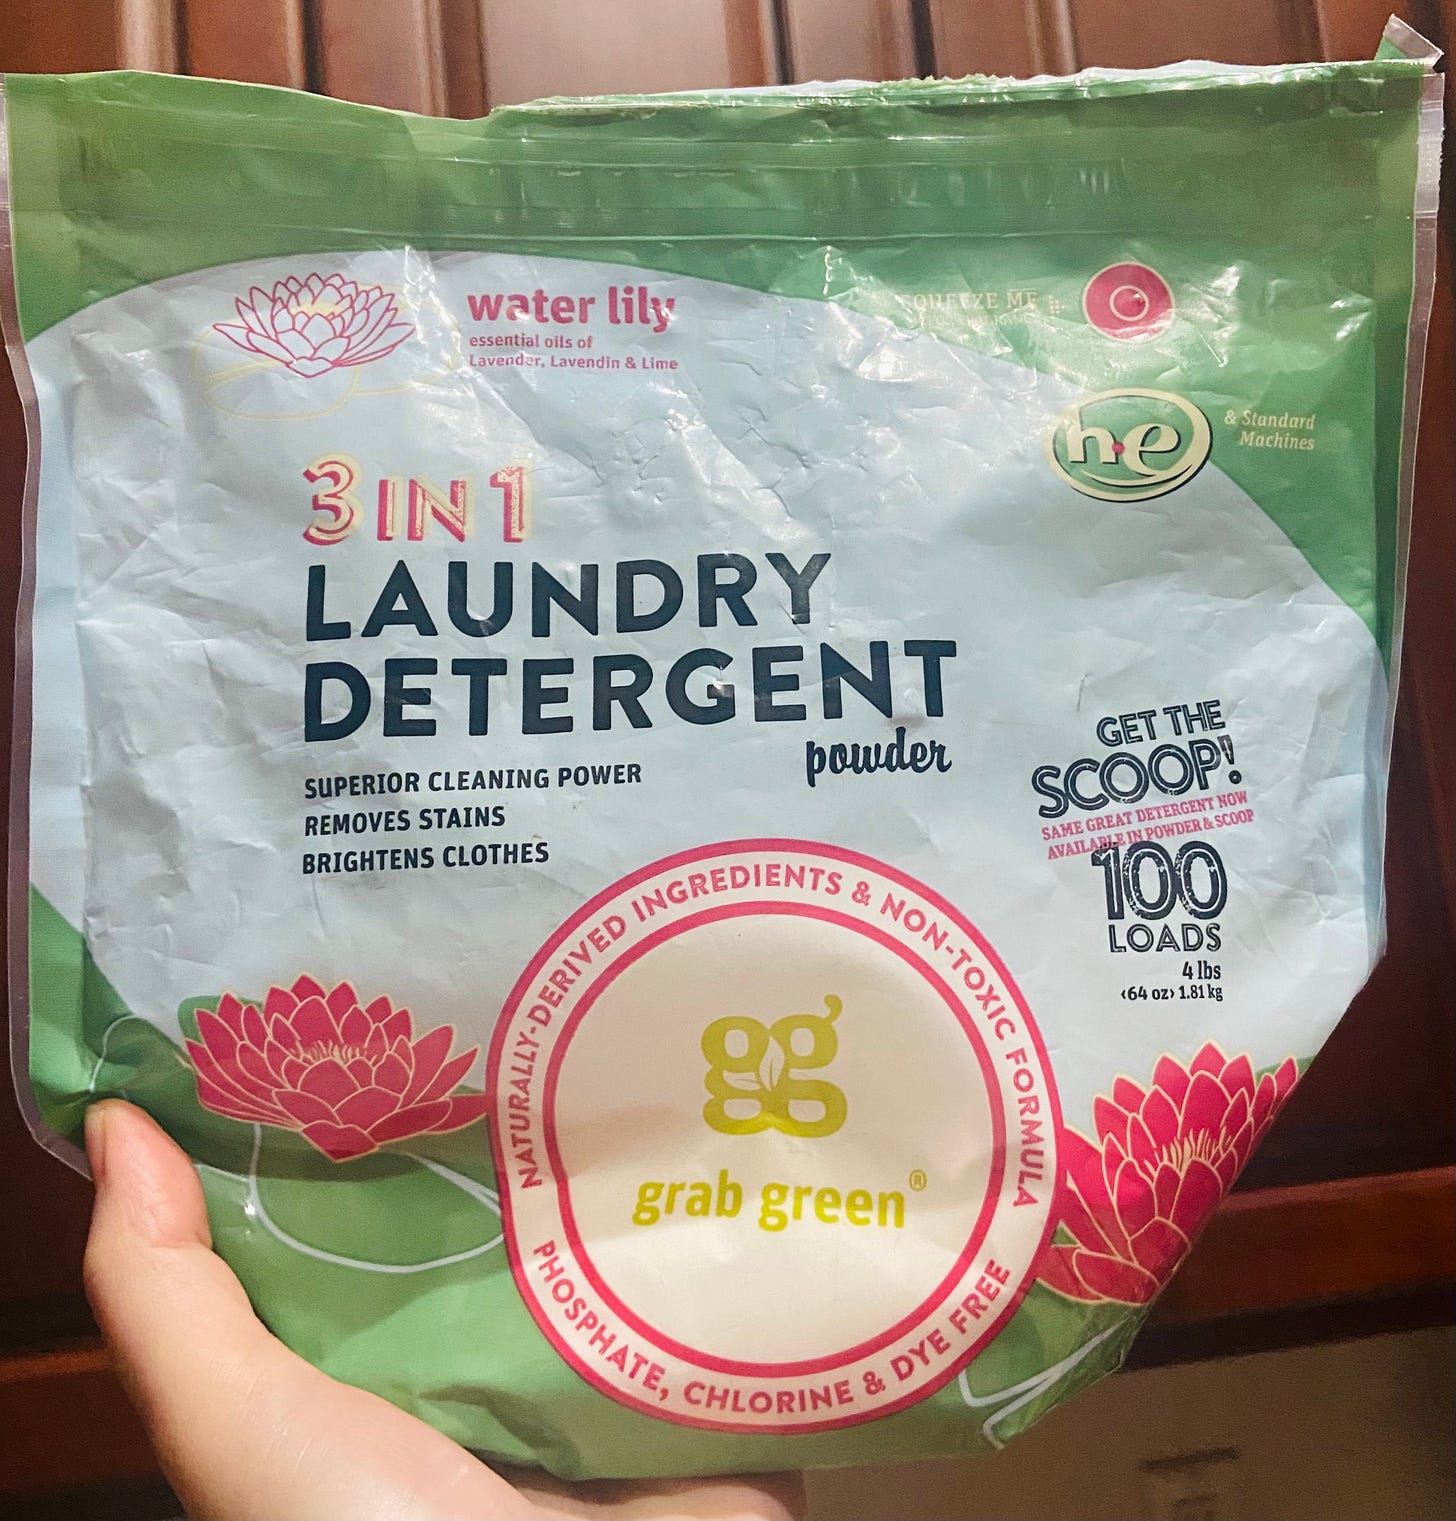 Bag reads: 3 in 1 Laundry Detergent Powder